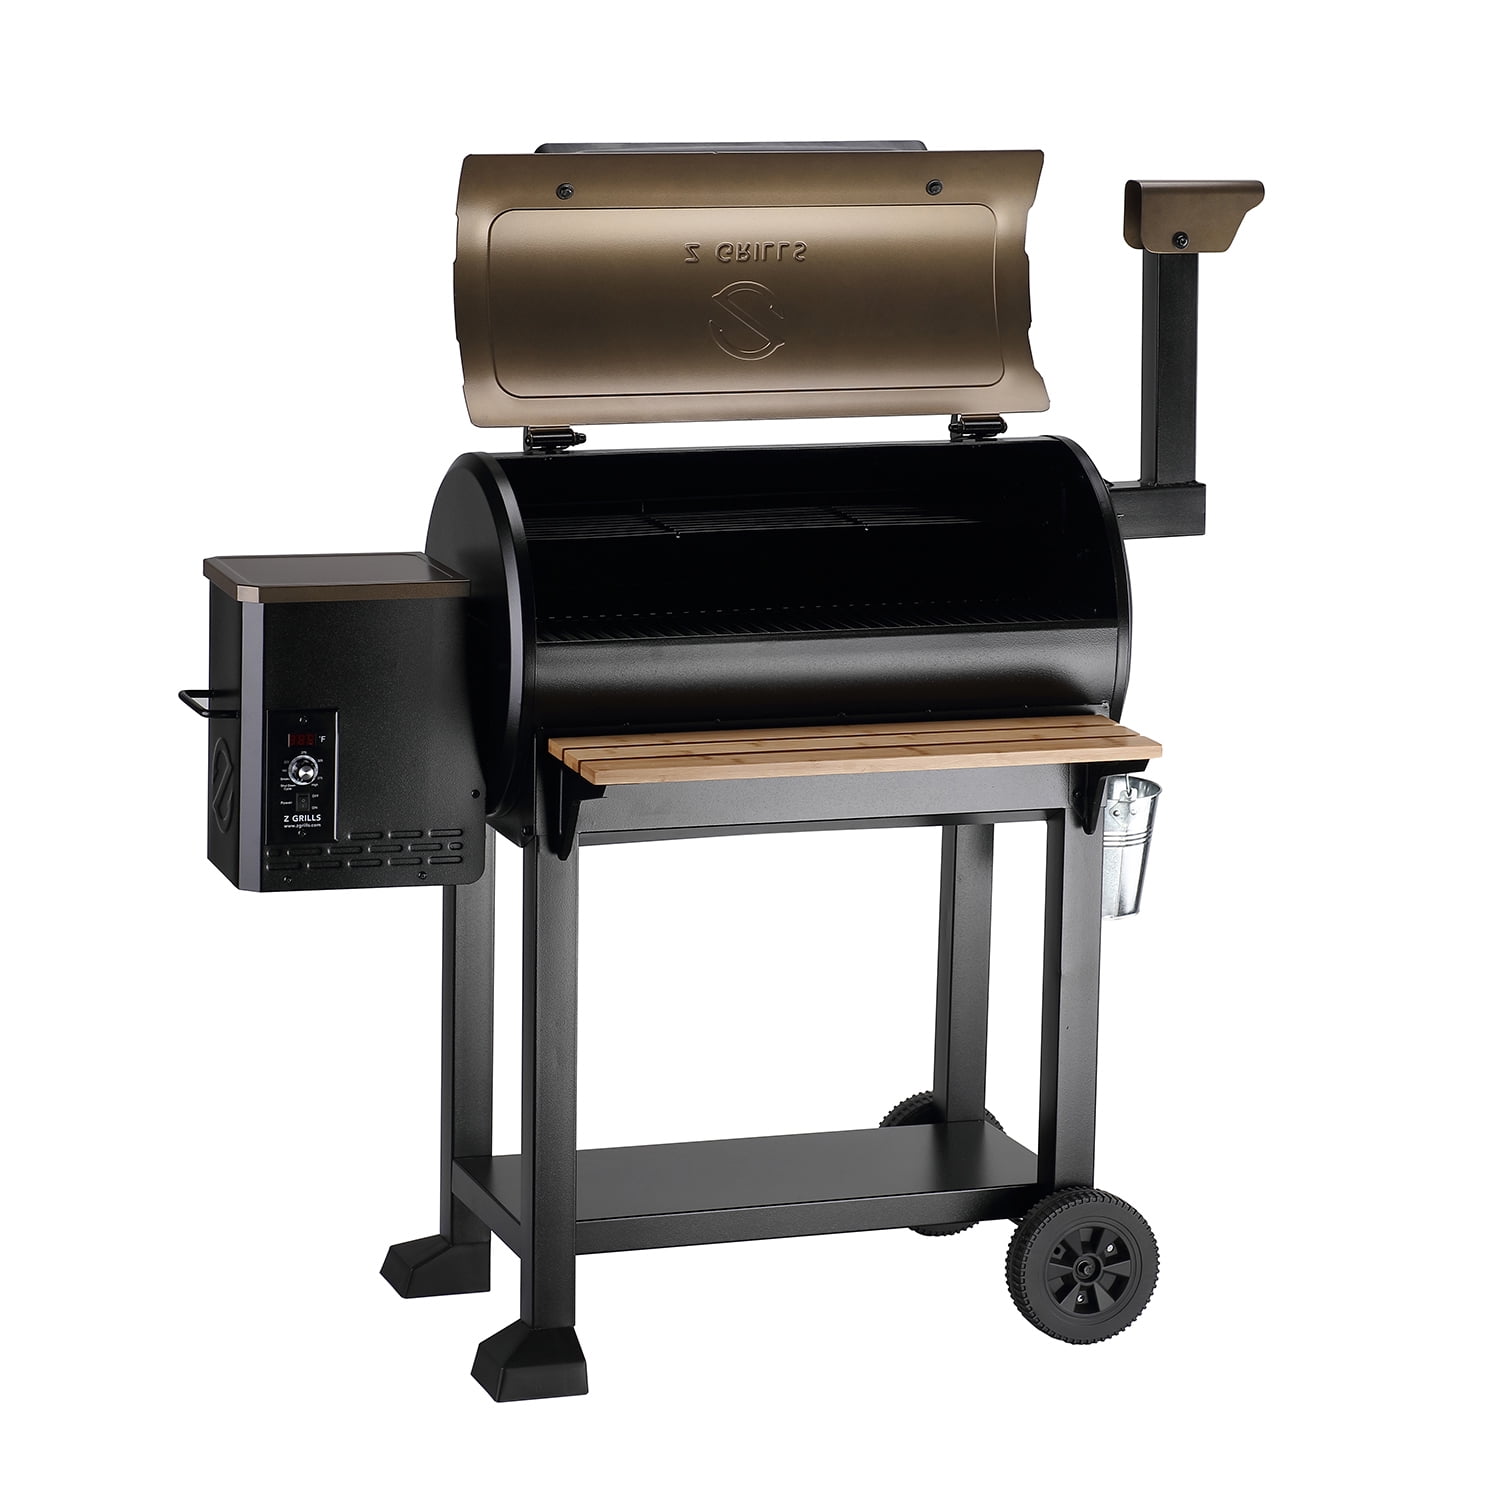 Z GRILLS Wood Pellet Grill and Electric Smoker w/ Auto Temperature Control